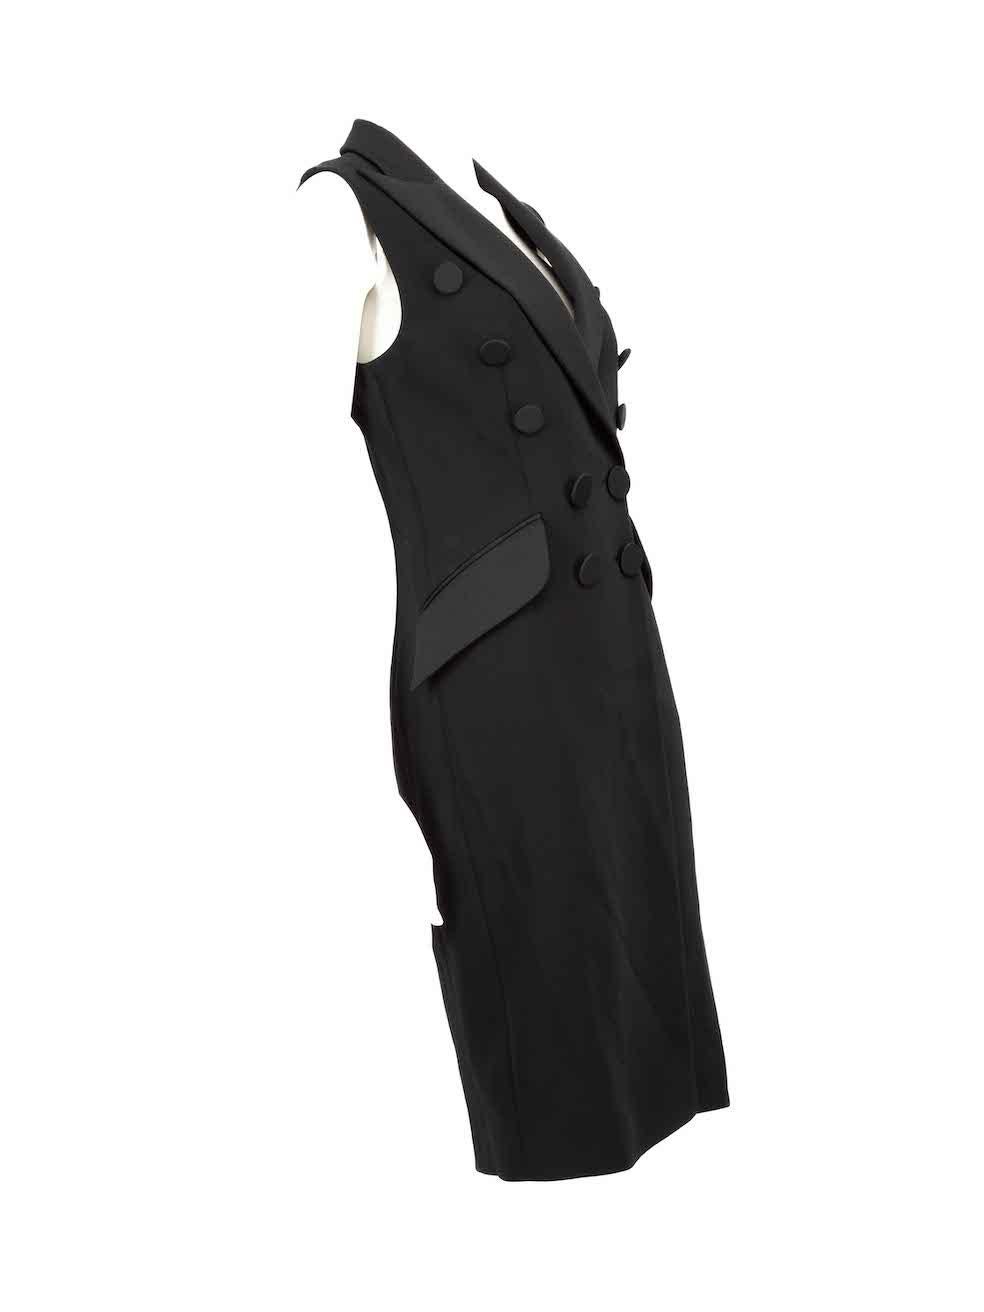 CONDITION is Never worn, with tags. No visible wear to the waistcoat is evident on this new Moschino Couture! designer resale item.
 
 
 
 Details
 
 
 Black
 
 Viscose
 
 Sleeveless waistcoat
 
 Long length
 
 Double breasted
 
 1x Chest pocket
 
